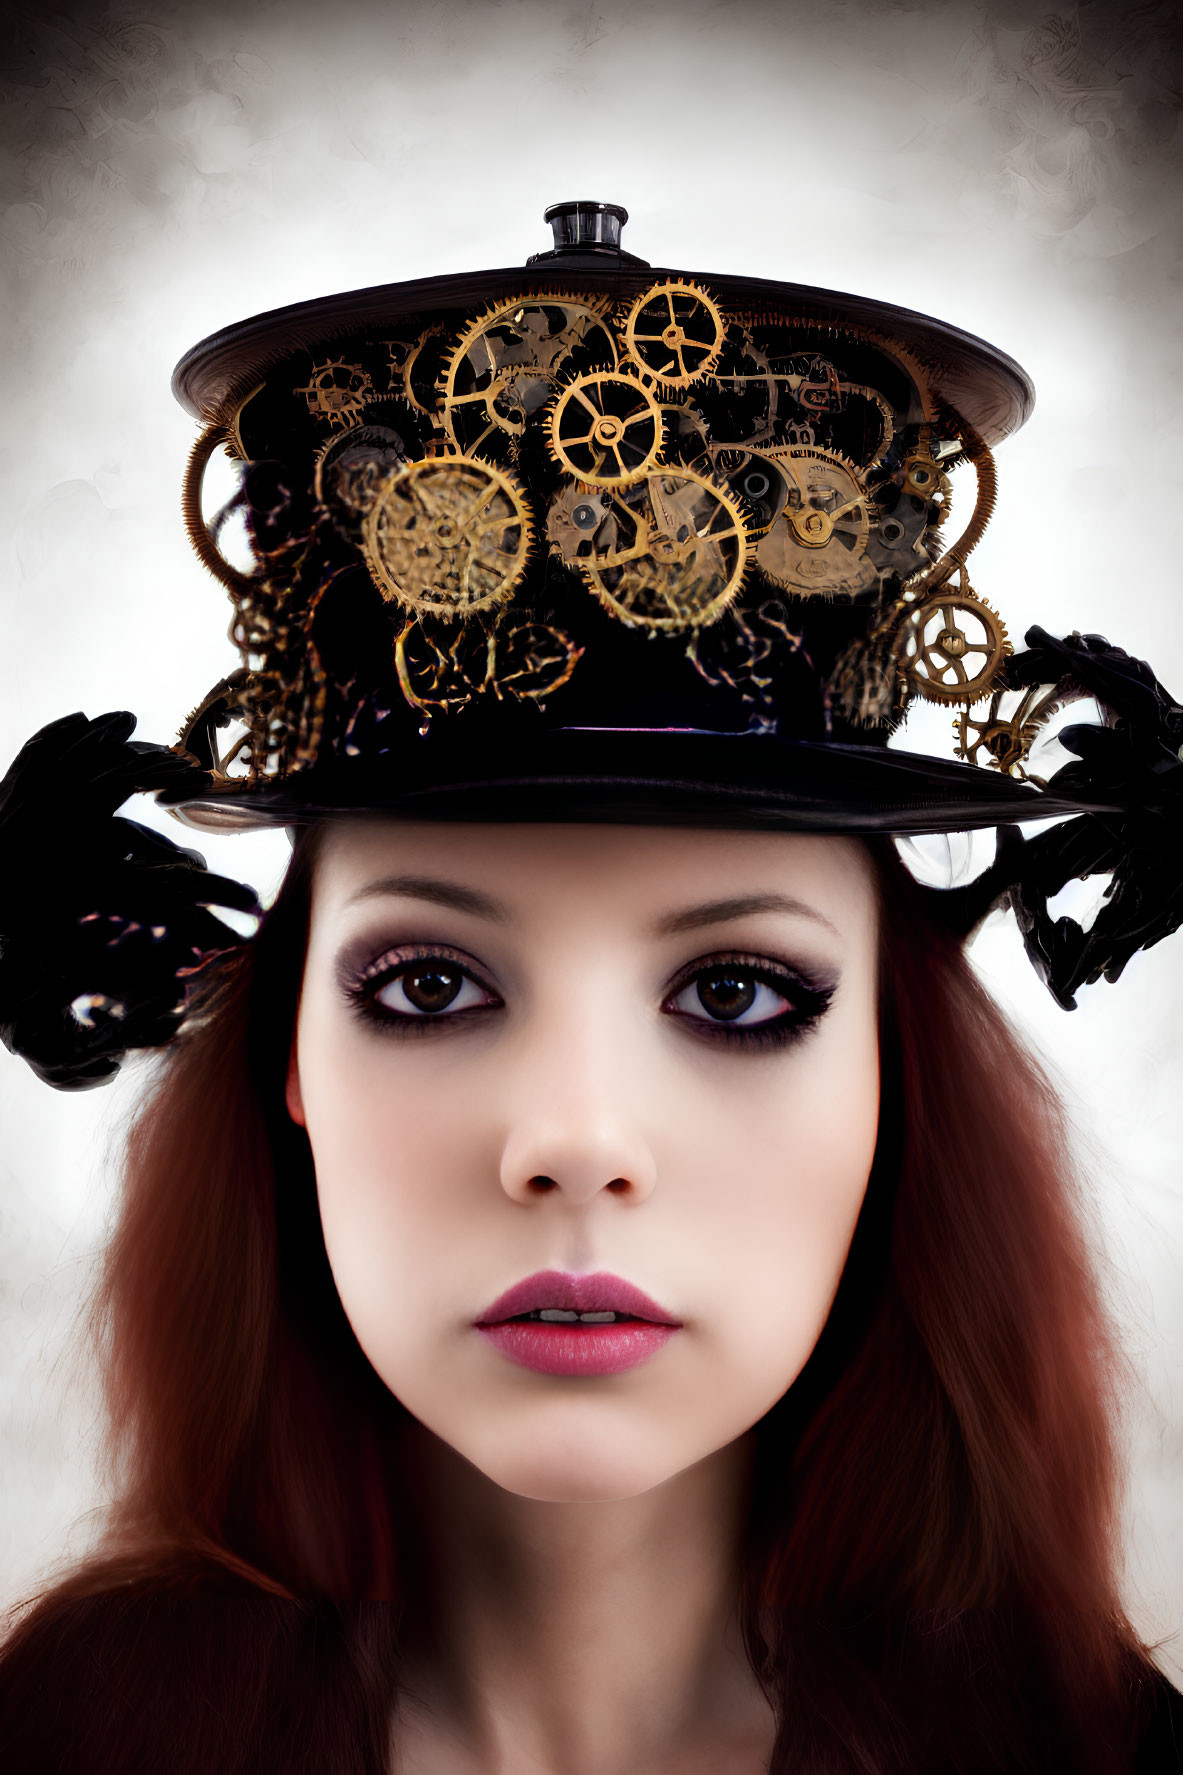 Red-haired woman with striking makeup in top hat filled with clock gears, surreal cloudy background